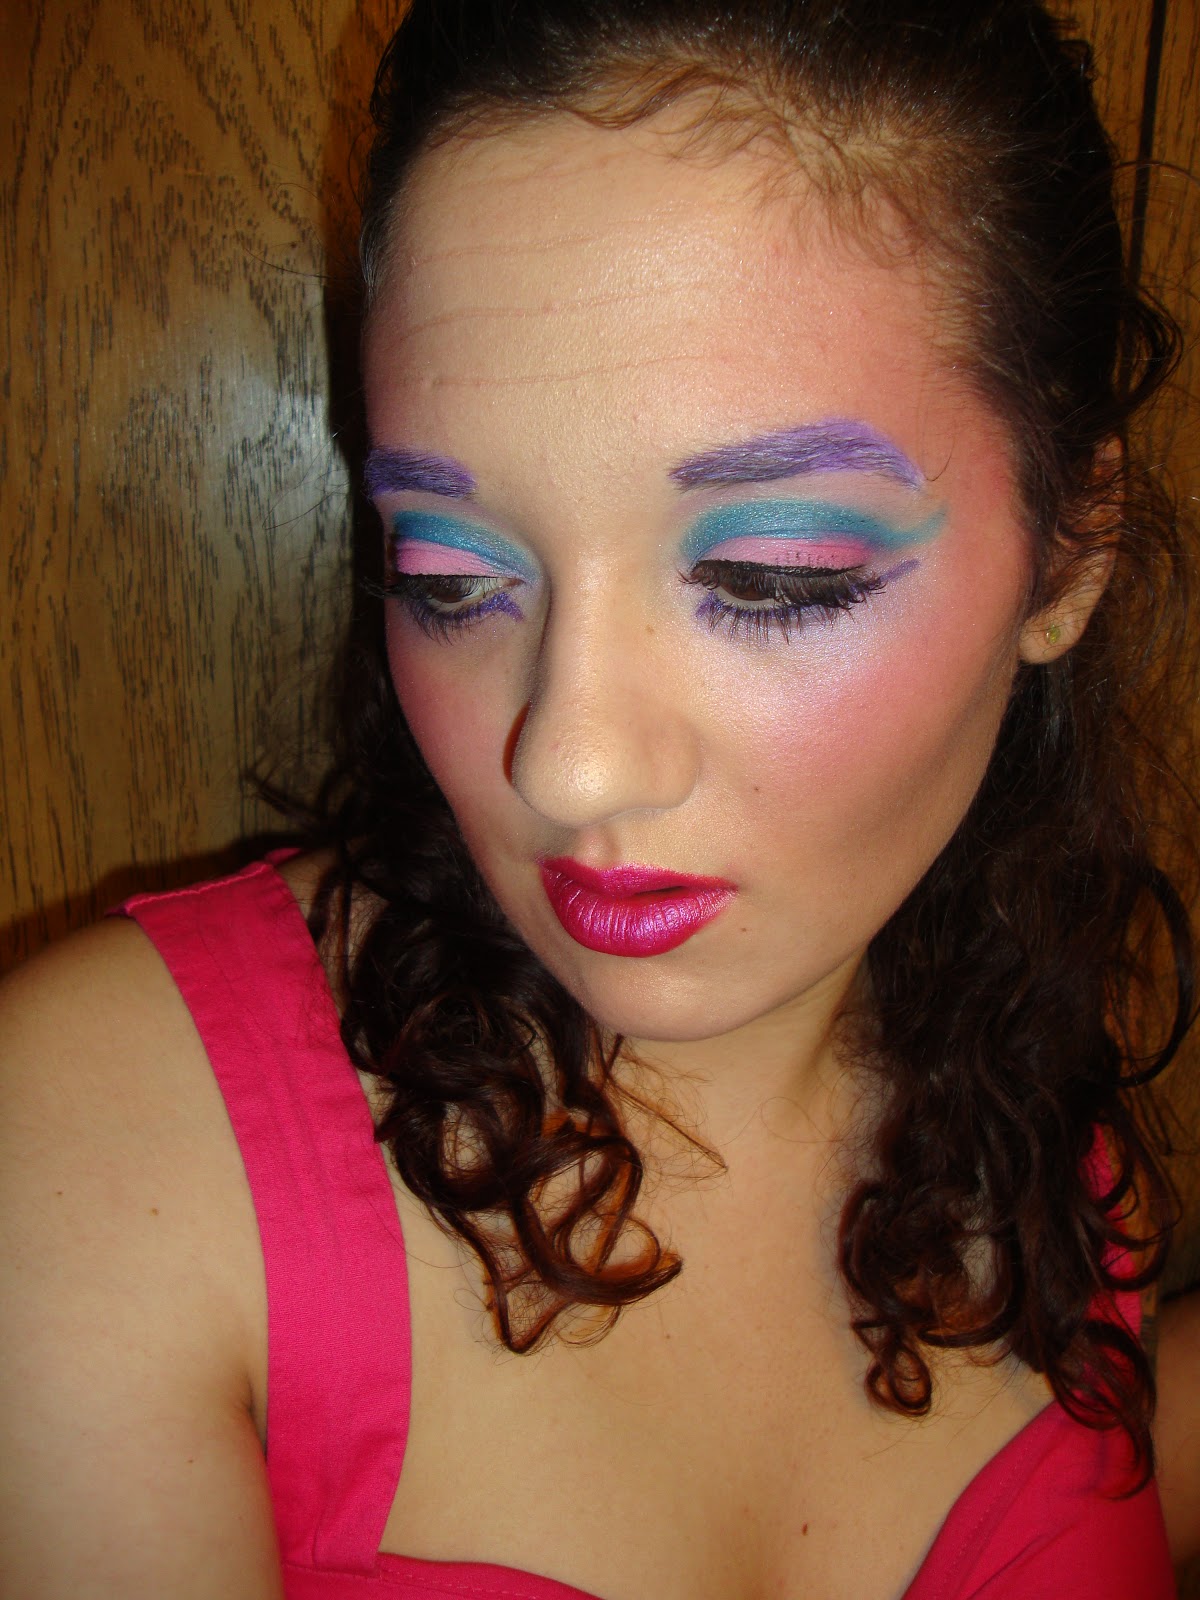 Cosmetic Reviews by Posh: Crazy Makeup on a Rainy Day